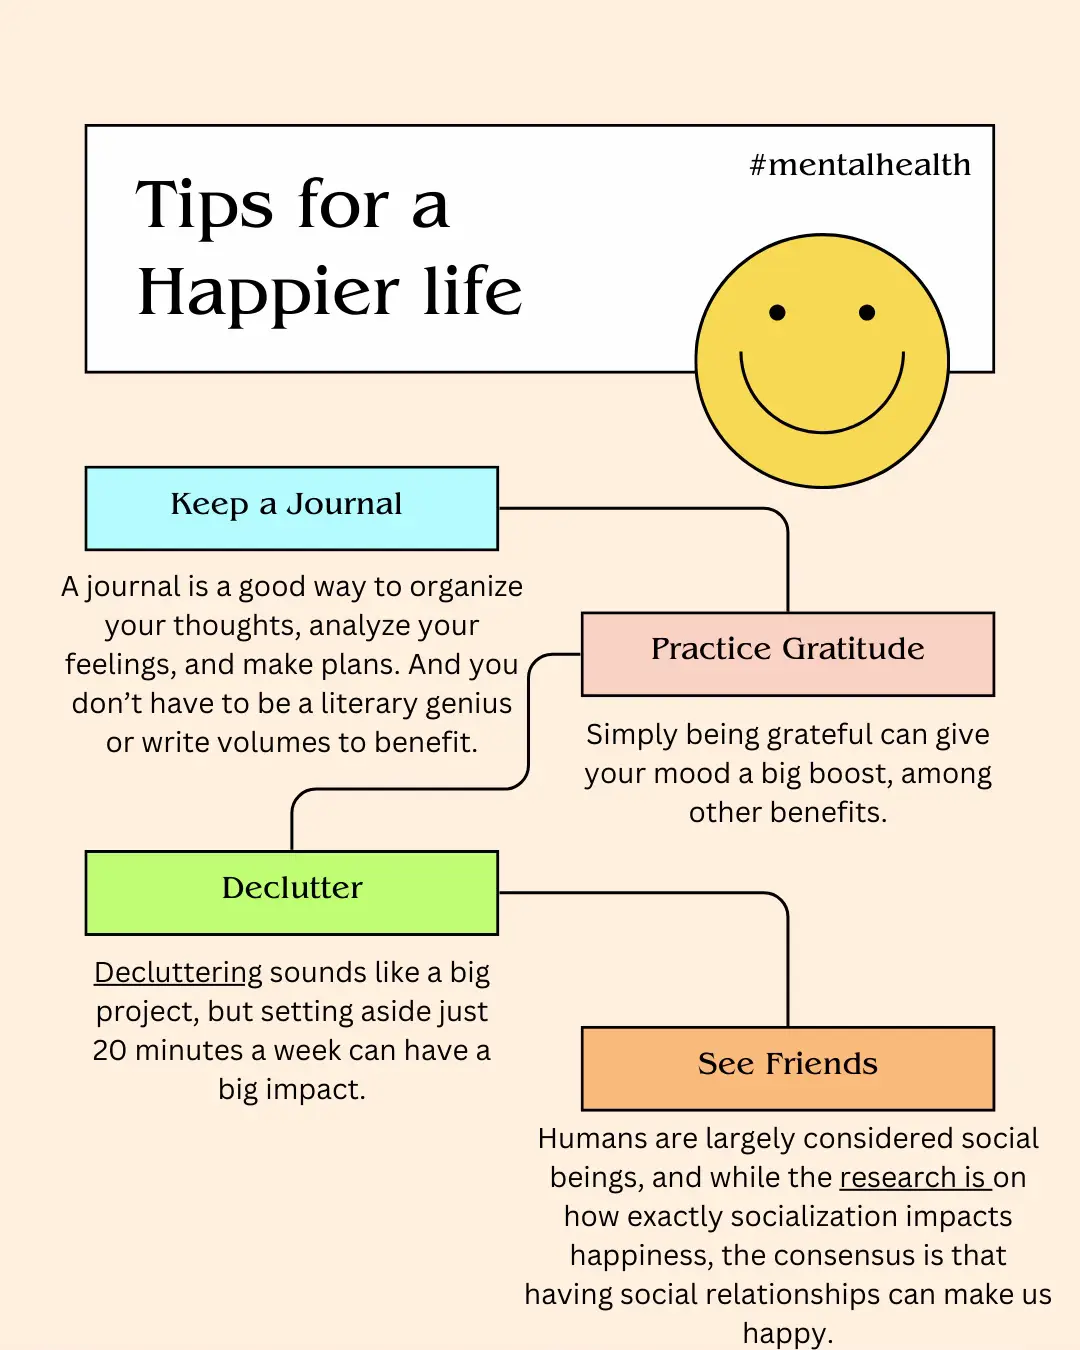 How To Enjoy Life: Expert Tips for Being Happier